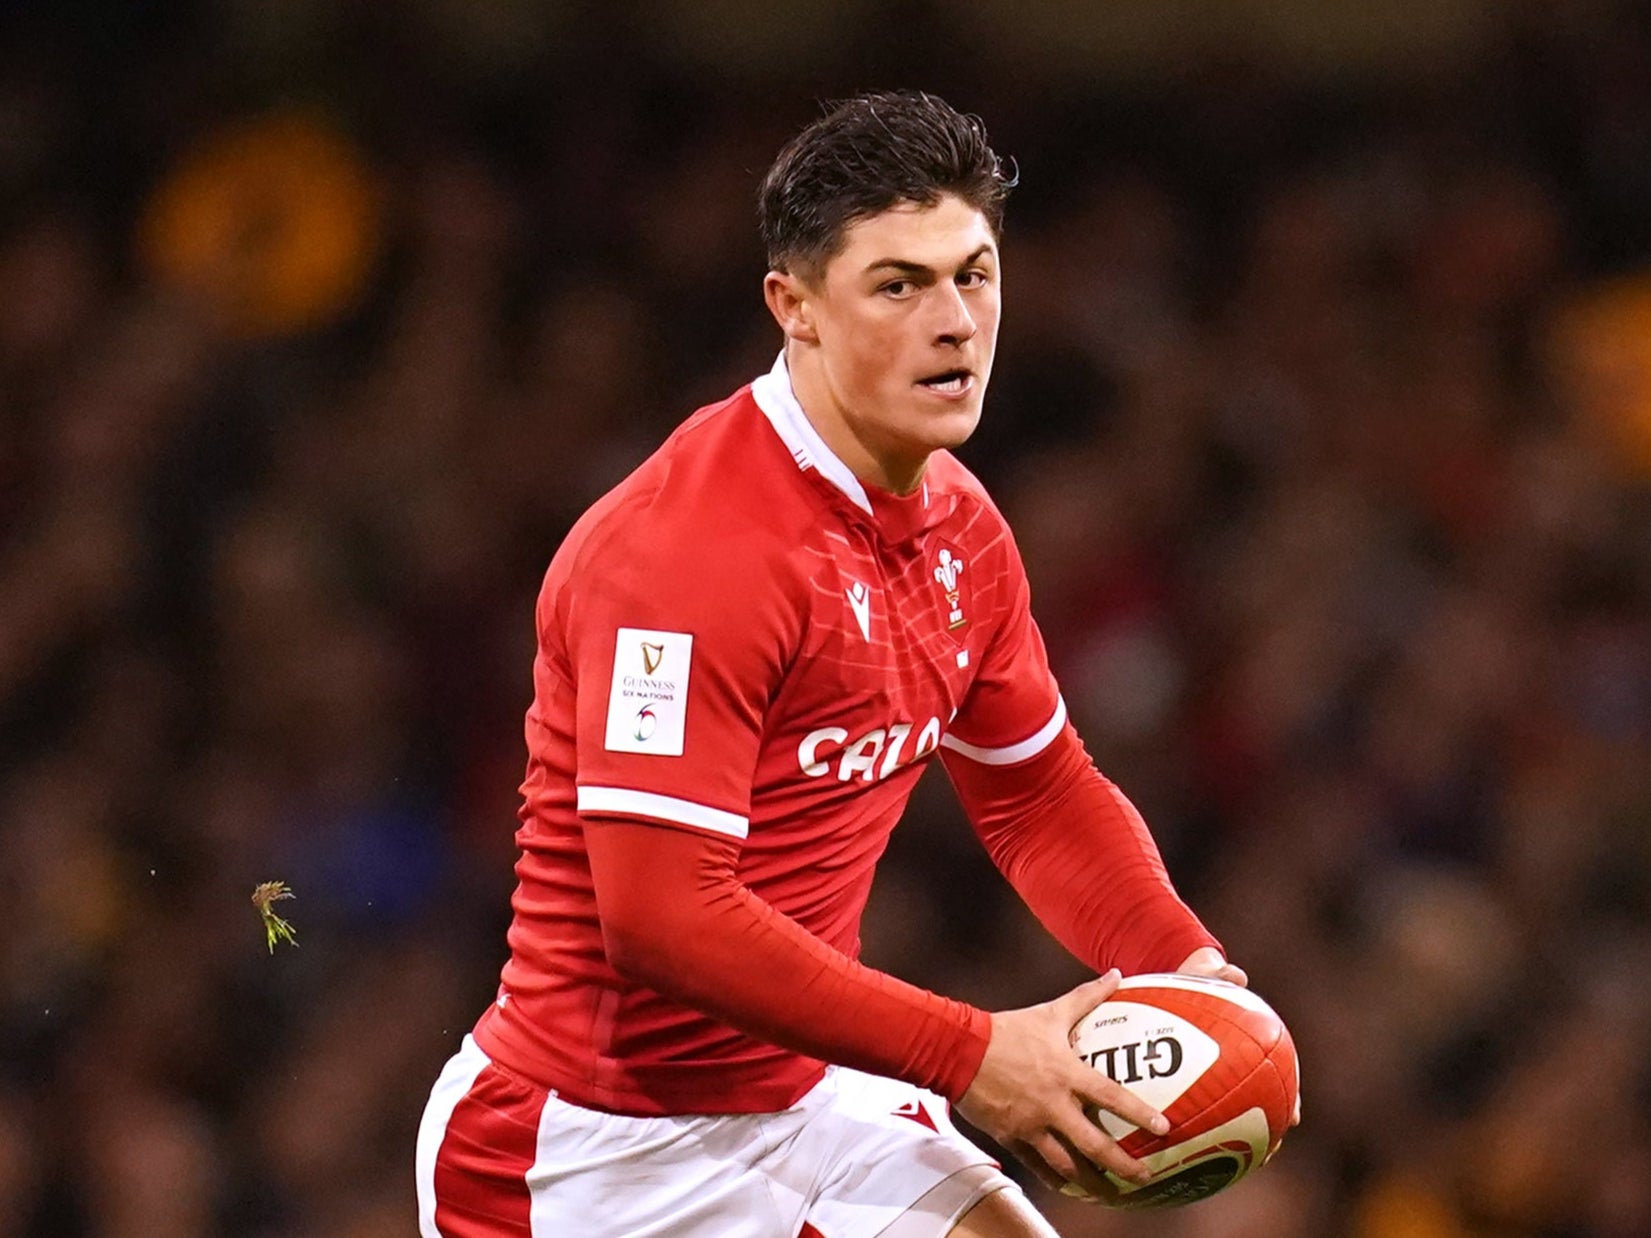 Louis Rees-Zammit will return to Wales’ starting line-up against Italy